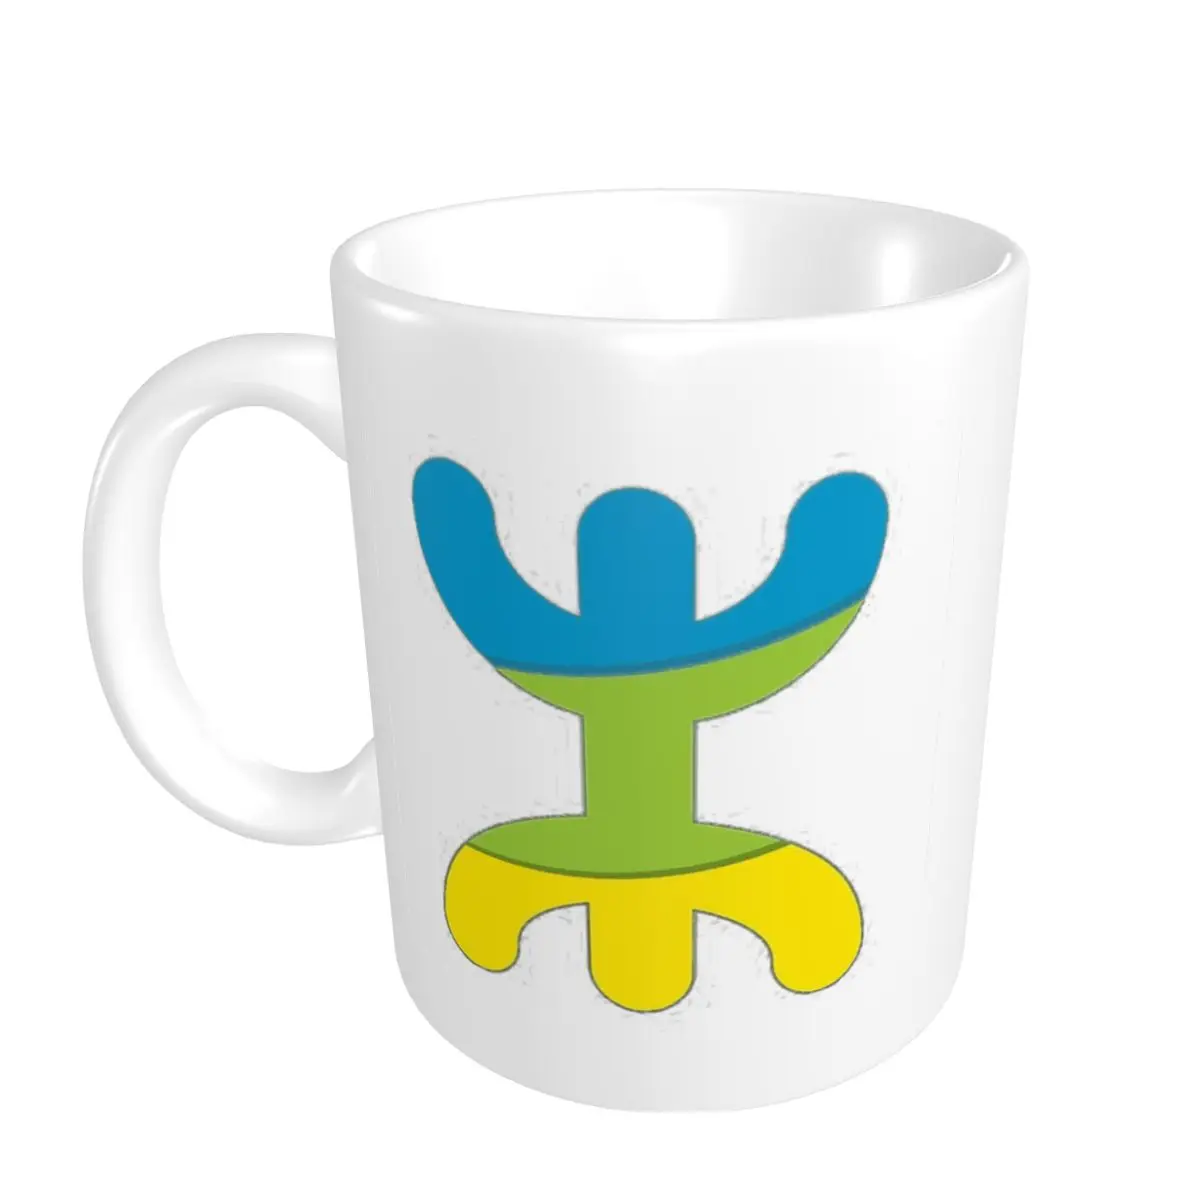 

Promo Novelty Kabyle Amazigh Design Mugs Funny Vintage Knights Templars Cross Medieval CUPS Print multi-function cups